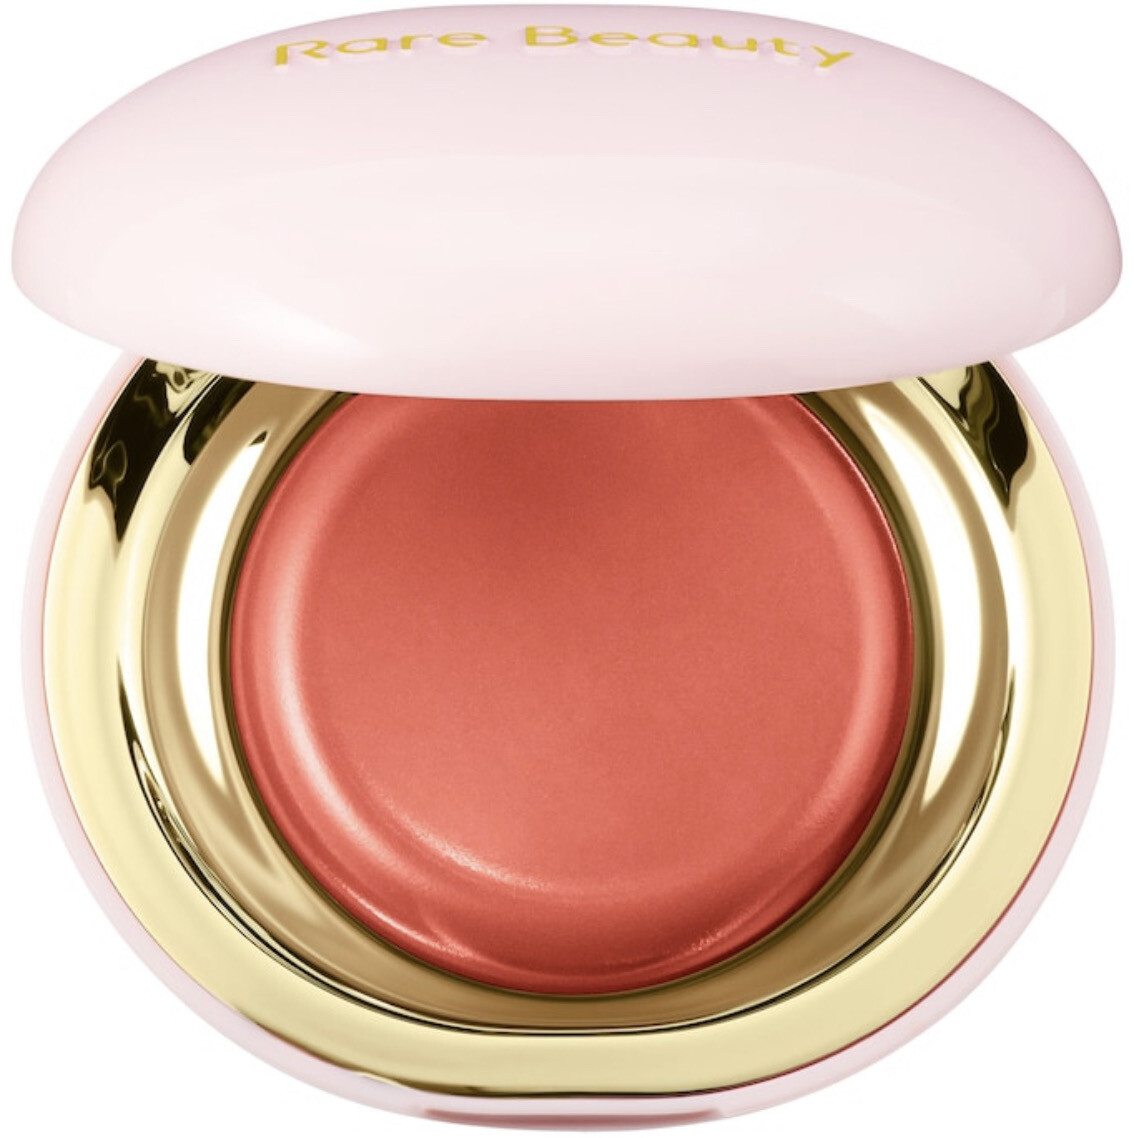 Rare Beauty - Stay Vulnerable Melting Cream Blush | Nearly Apricot - muted coral